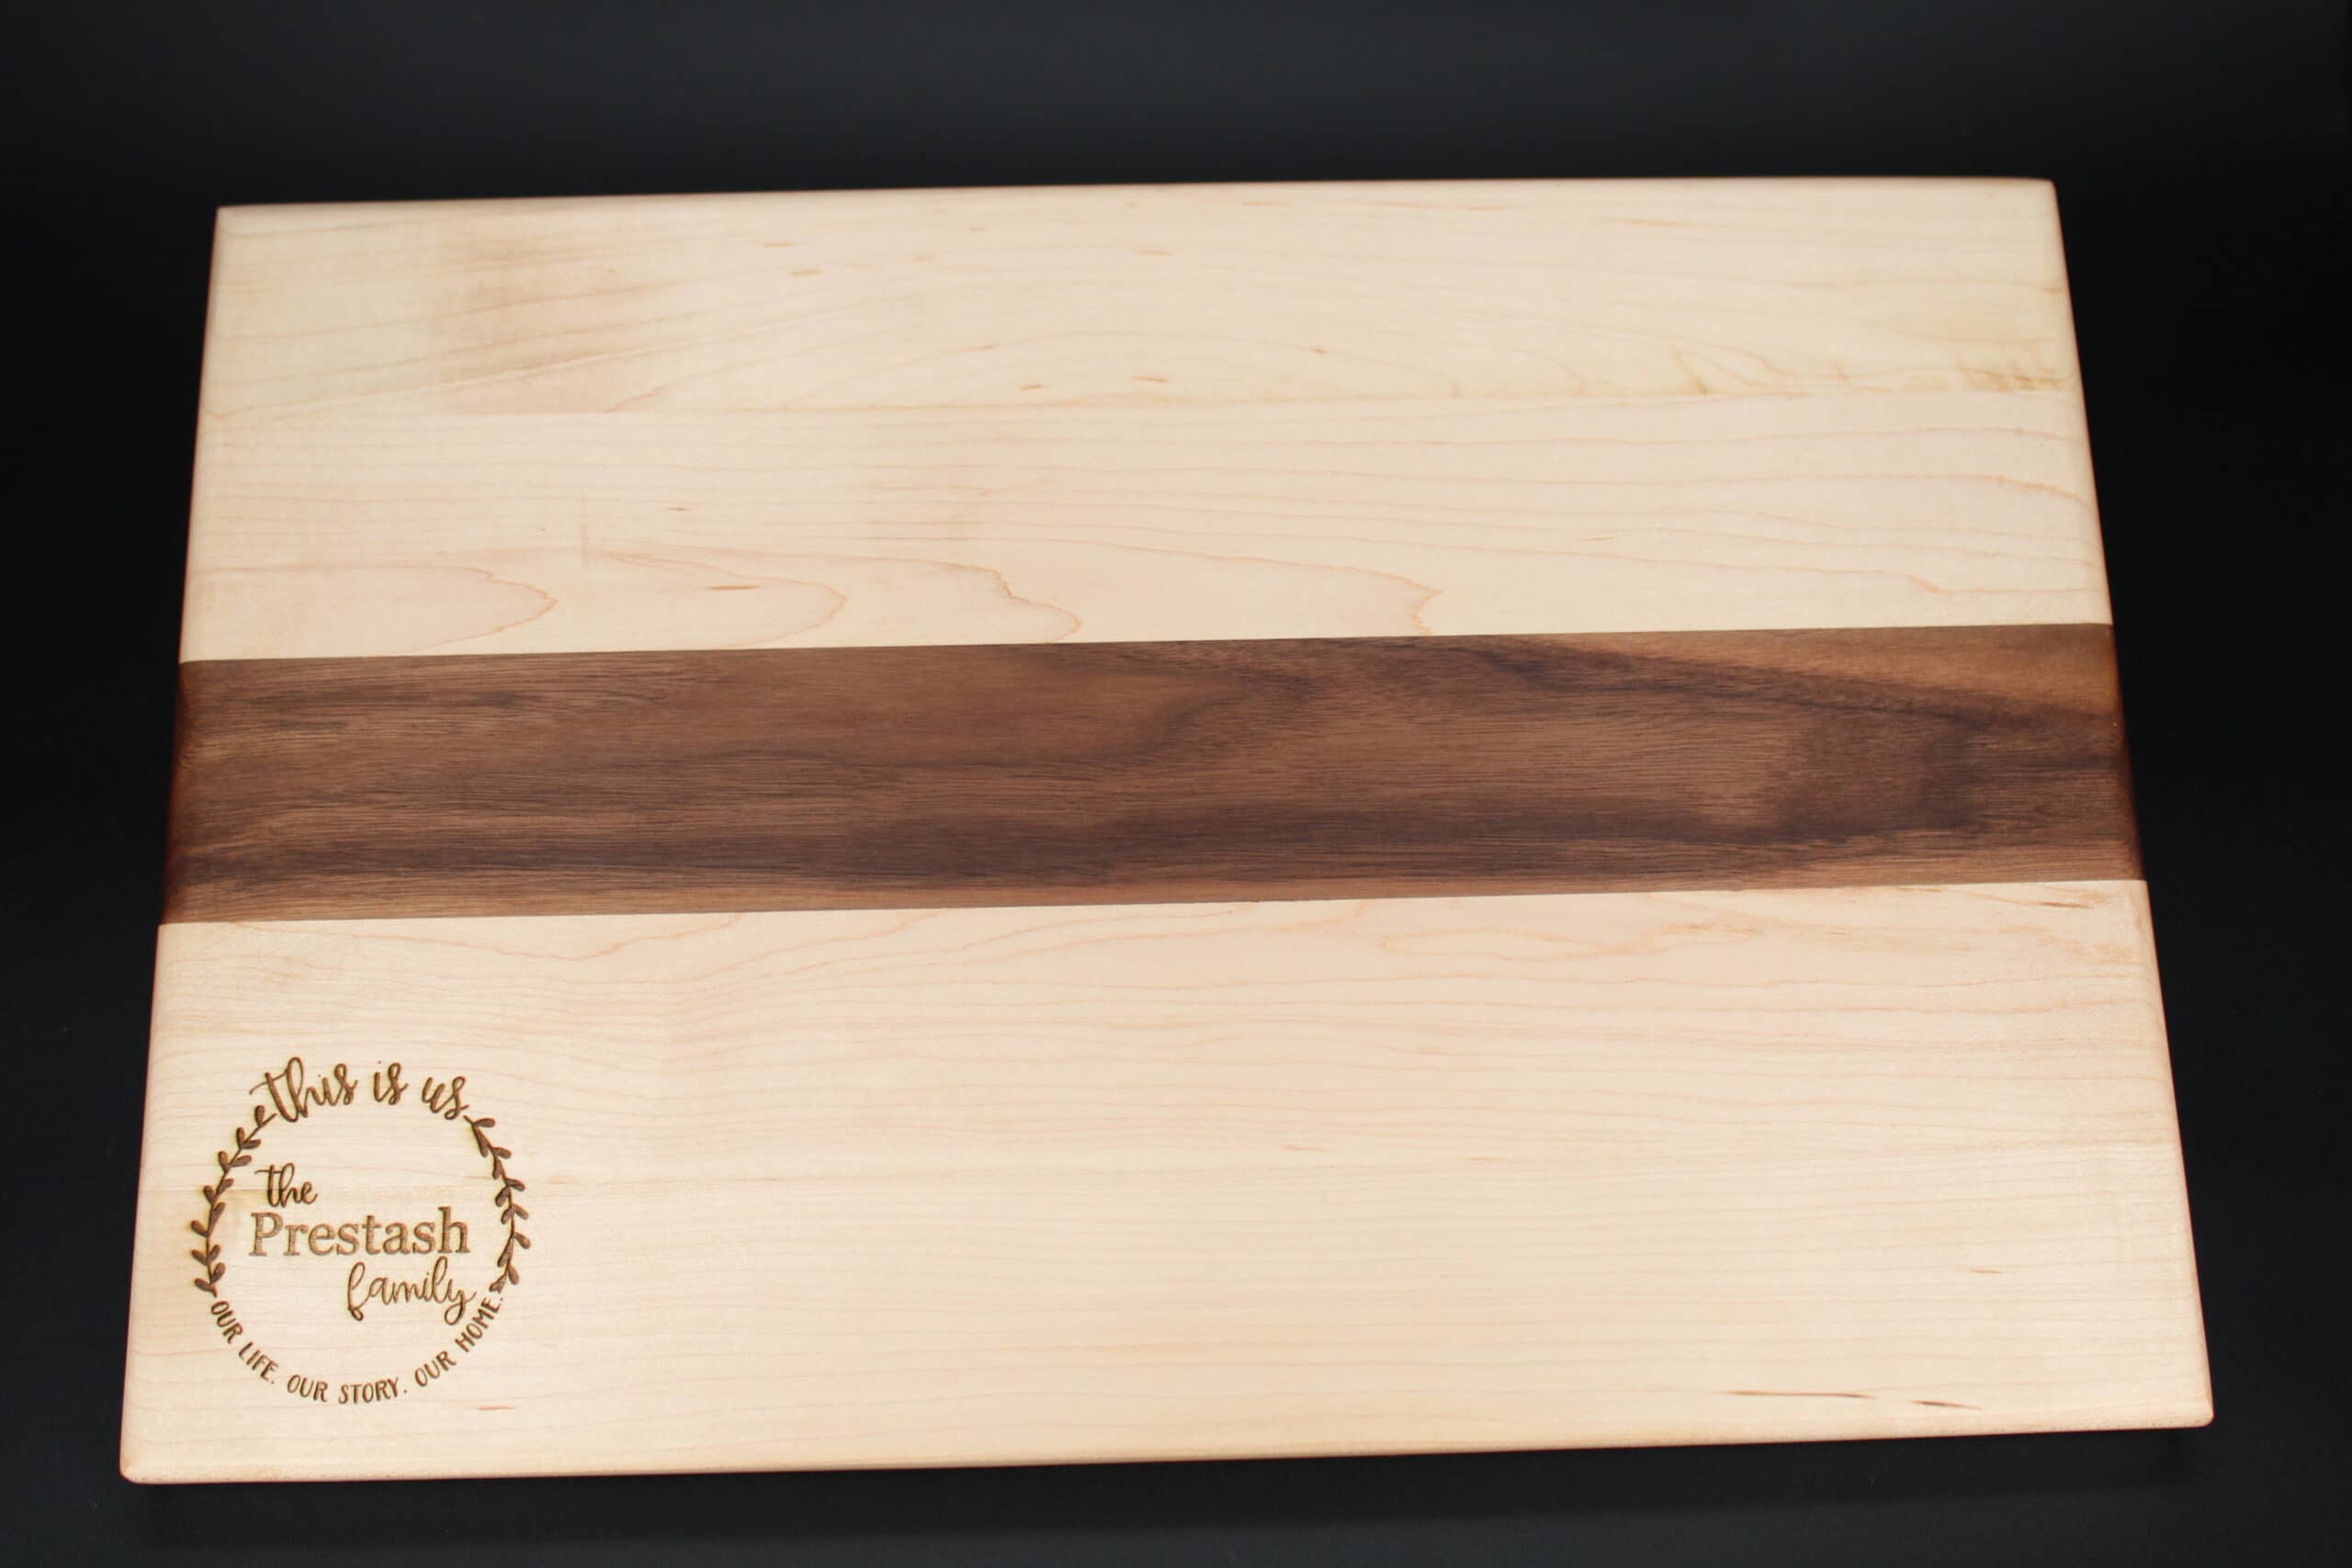 custom wreath engraved on Maple and Walnut cutting board/charcuterie board as a closing gift